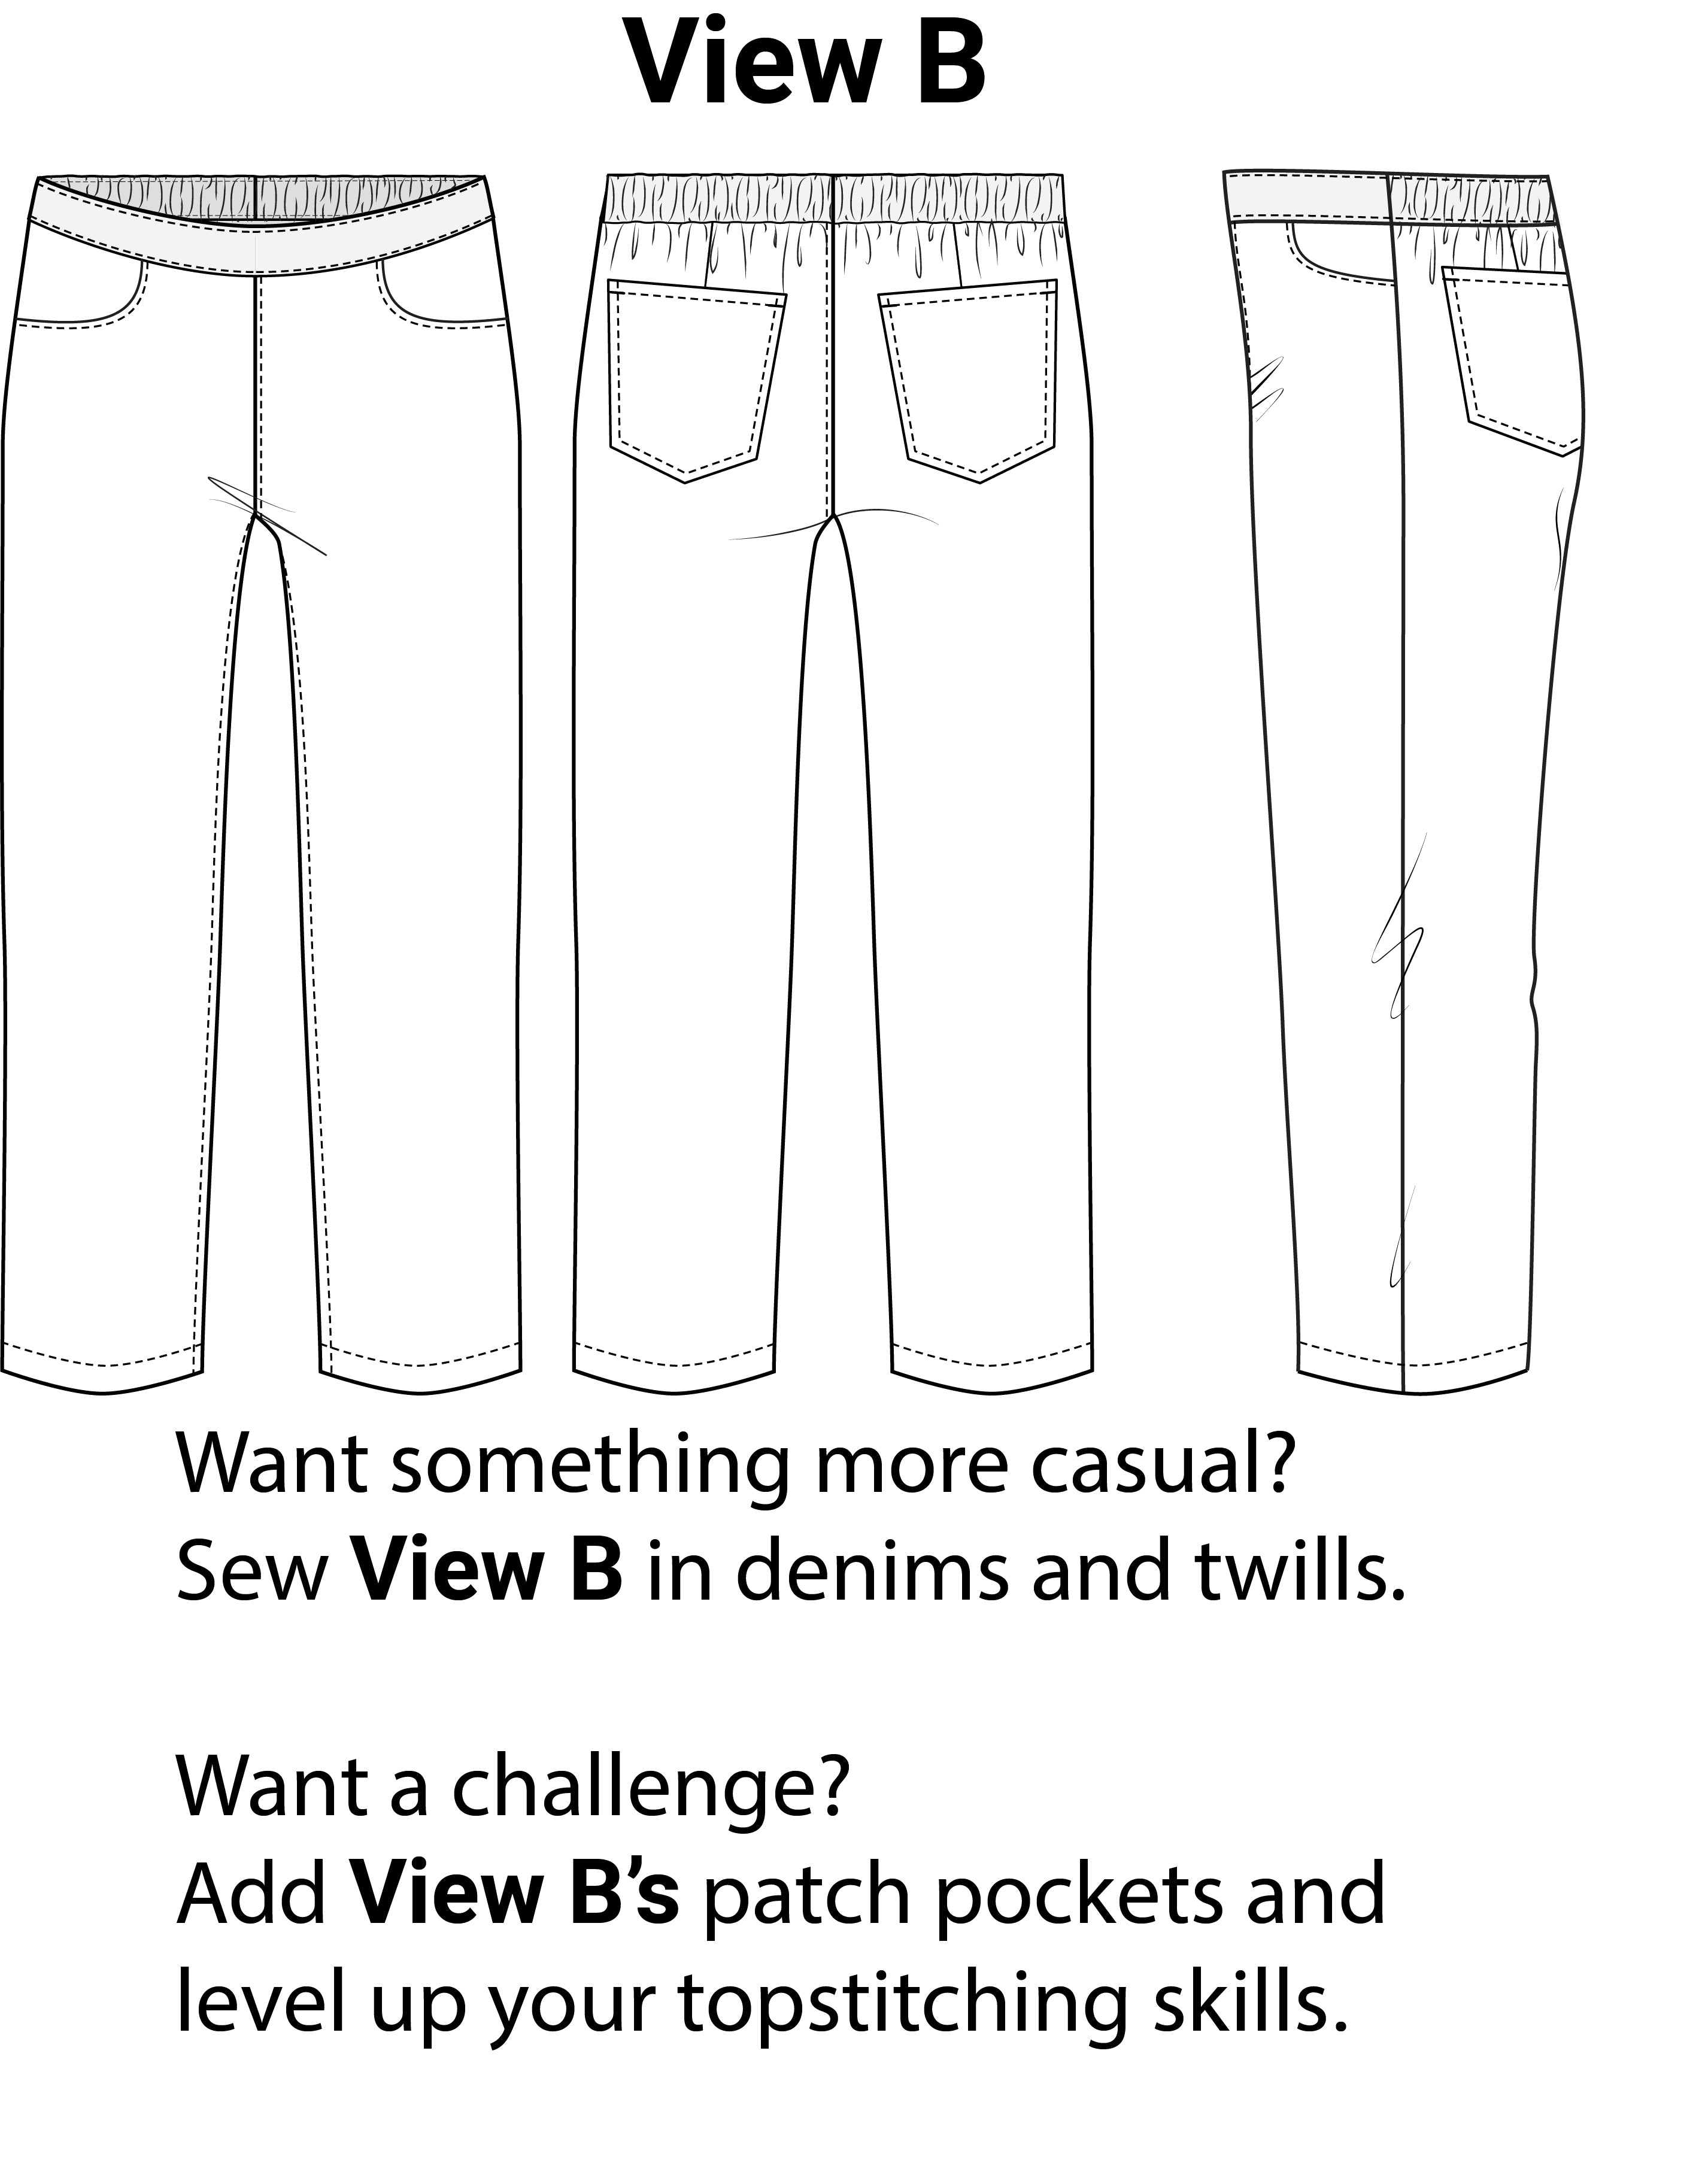 A line drawing of View B of the Secret Jeans Trousers. The trousers have jeans-style front pockets with an ankle-length hem. The waistband sits at the natural waist with back elastic. View B is a mock jean with topstitching and back pockets.